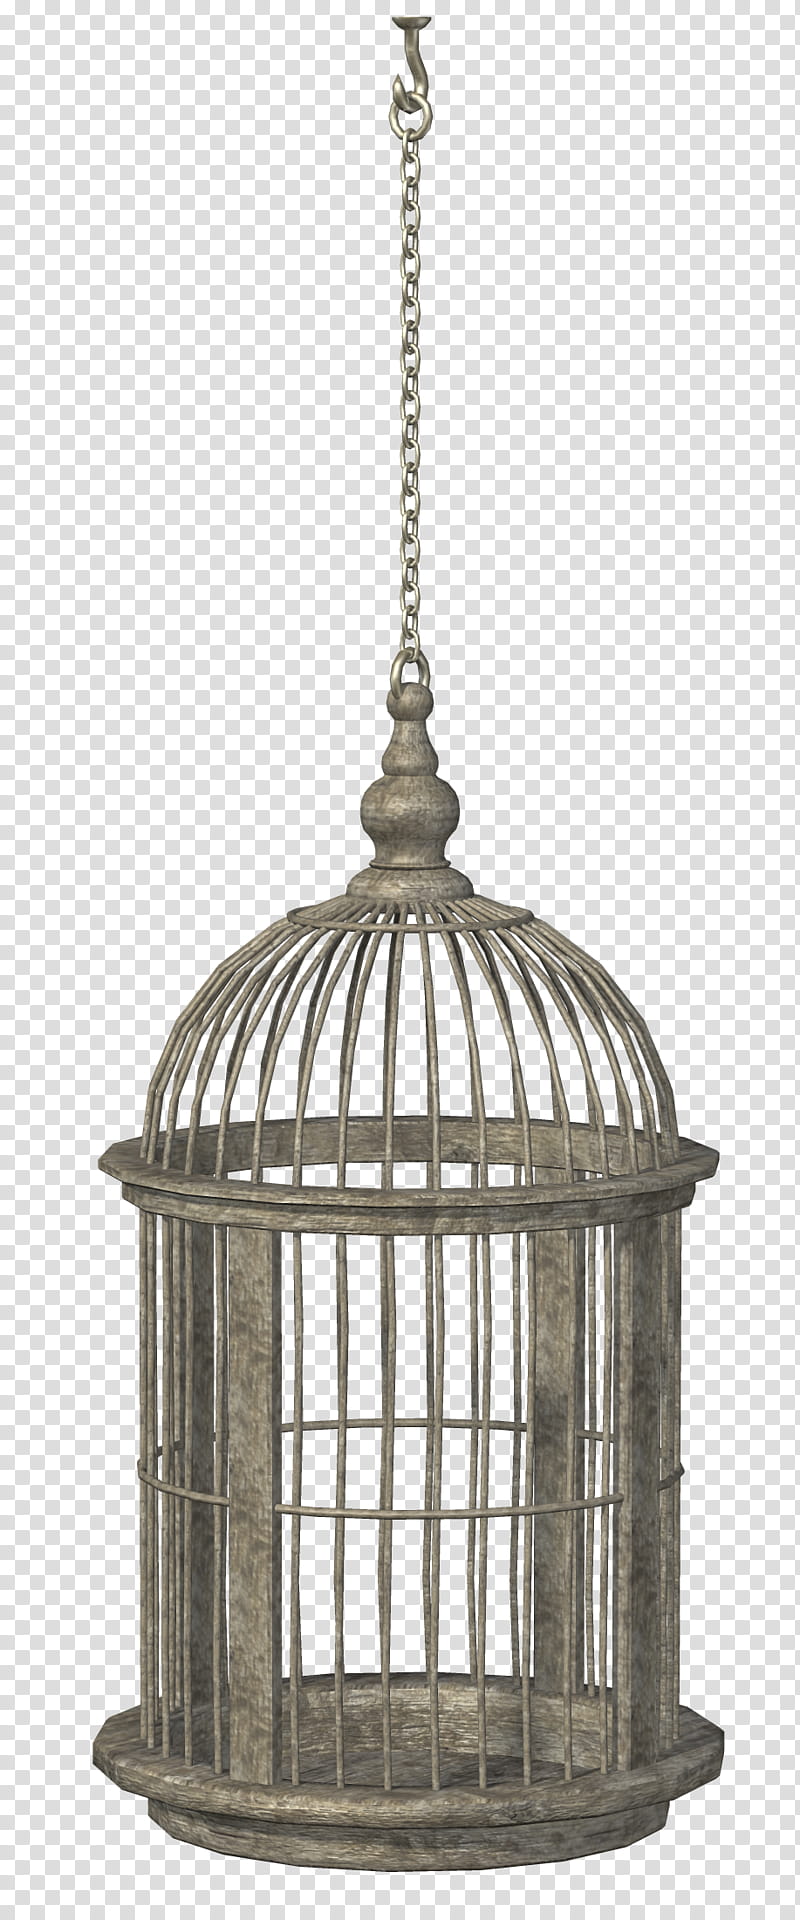 Cage, grey bird cage transparent background PNG clipart